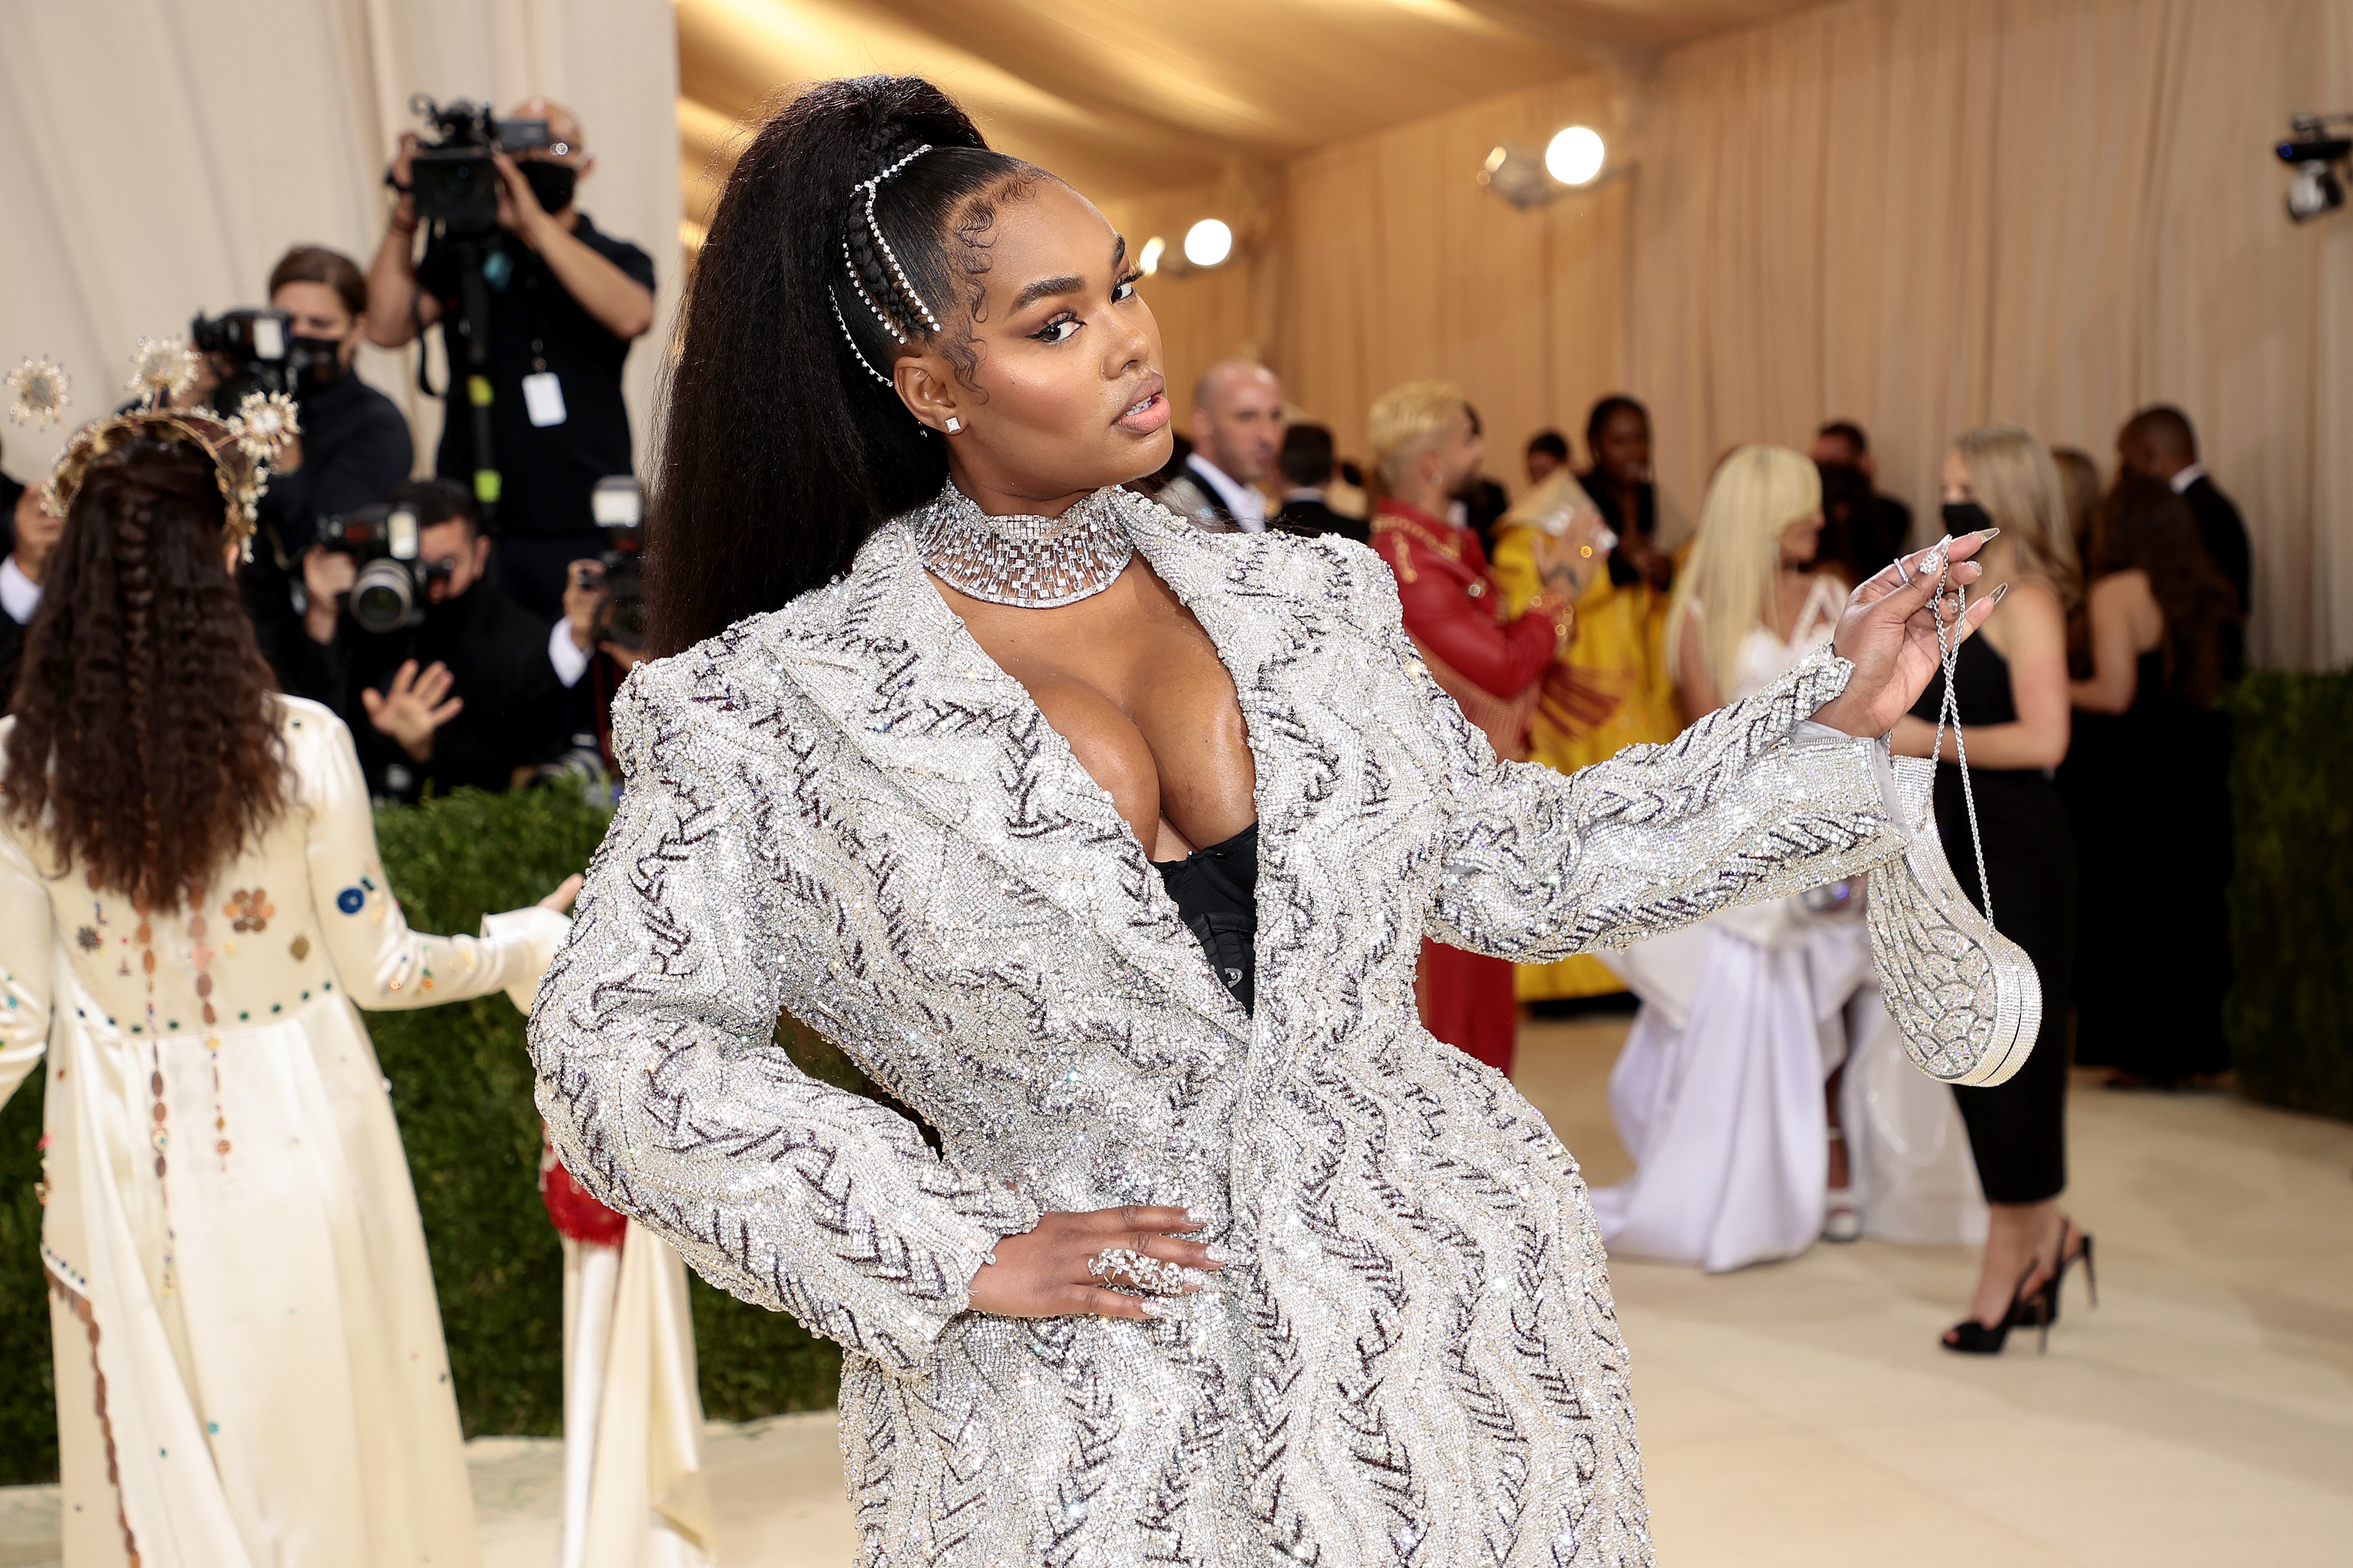 NEW YORK, NEW YORK - SEPTEMBER 13: Precious Lee attends The 2021 Met Gala Celebrating In America: A Lexicon Of Fashion at Metropolitan Museum of Art on September 13, 2021 in New York City. (Photo by Dimitrios Kambouris/Getty Images for The Met Museum/Vogu (Foto: Getty Images for The Met Museum/)